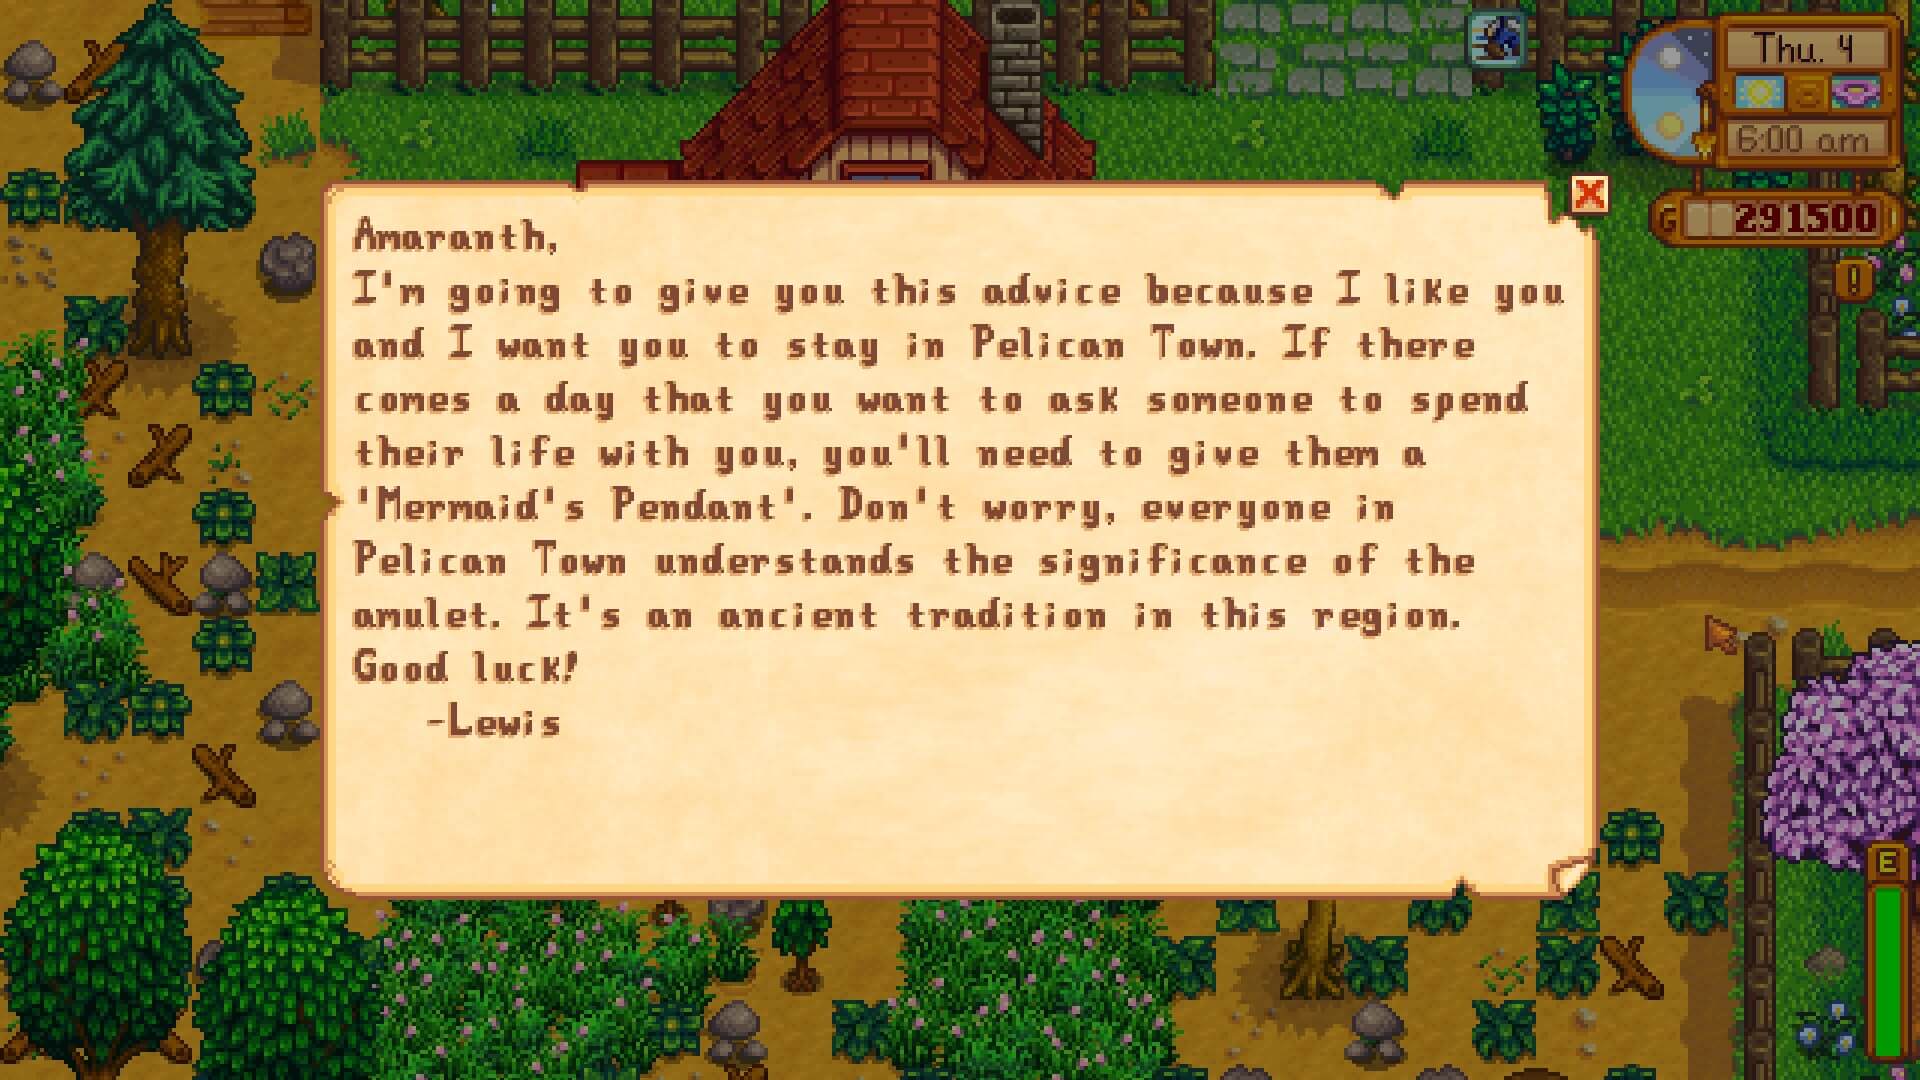 An example of some changed text in the Platonic Relationship mod in Stardew Valley.